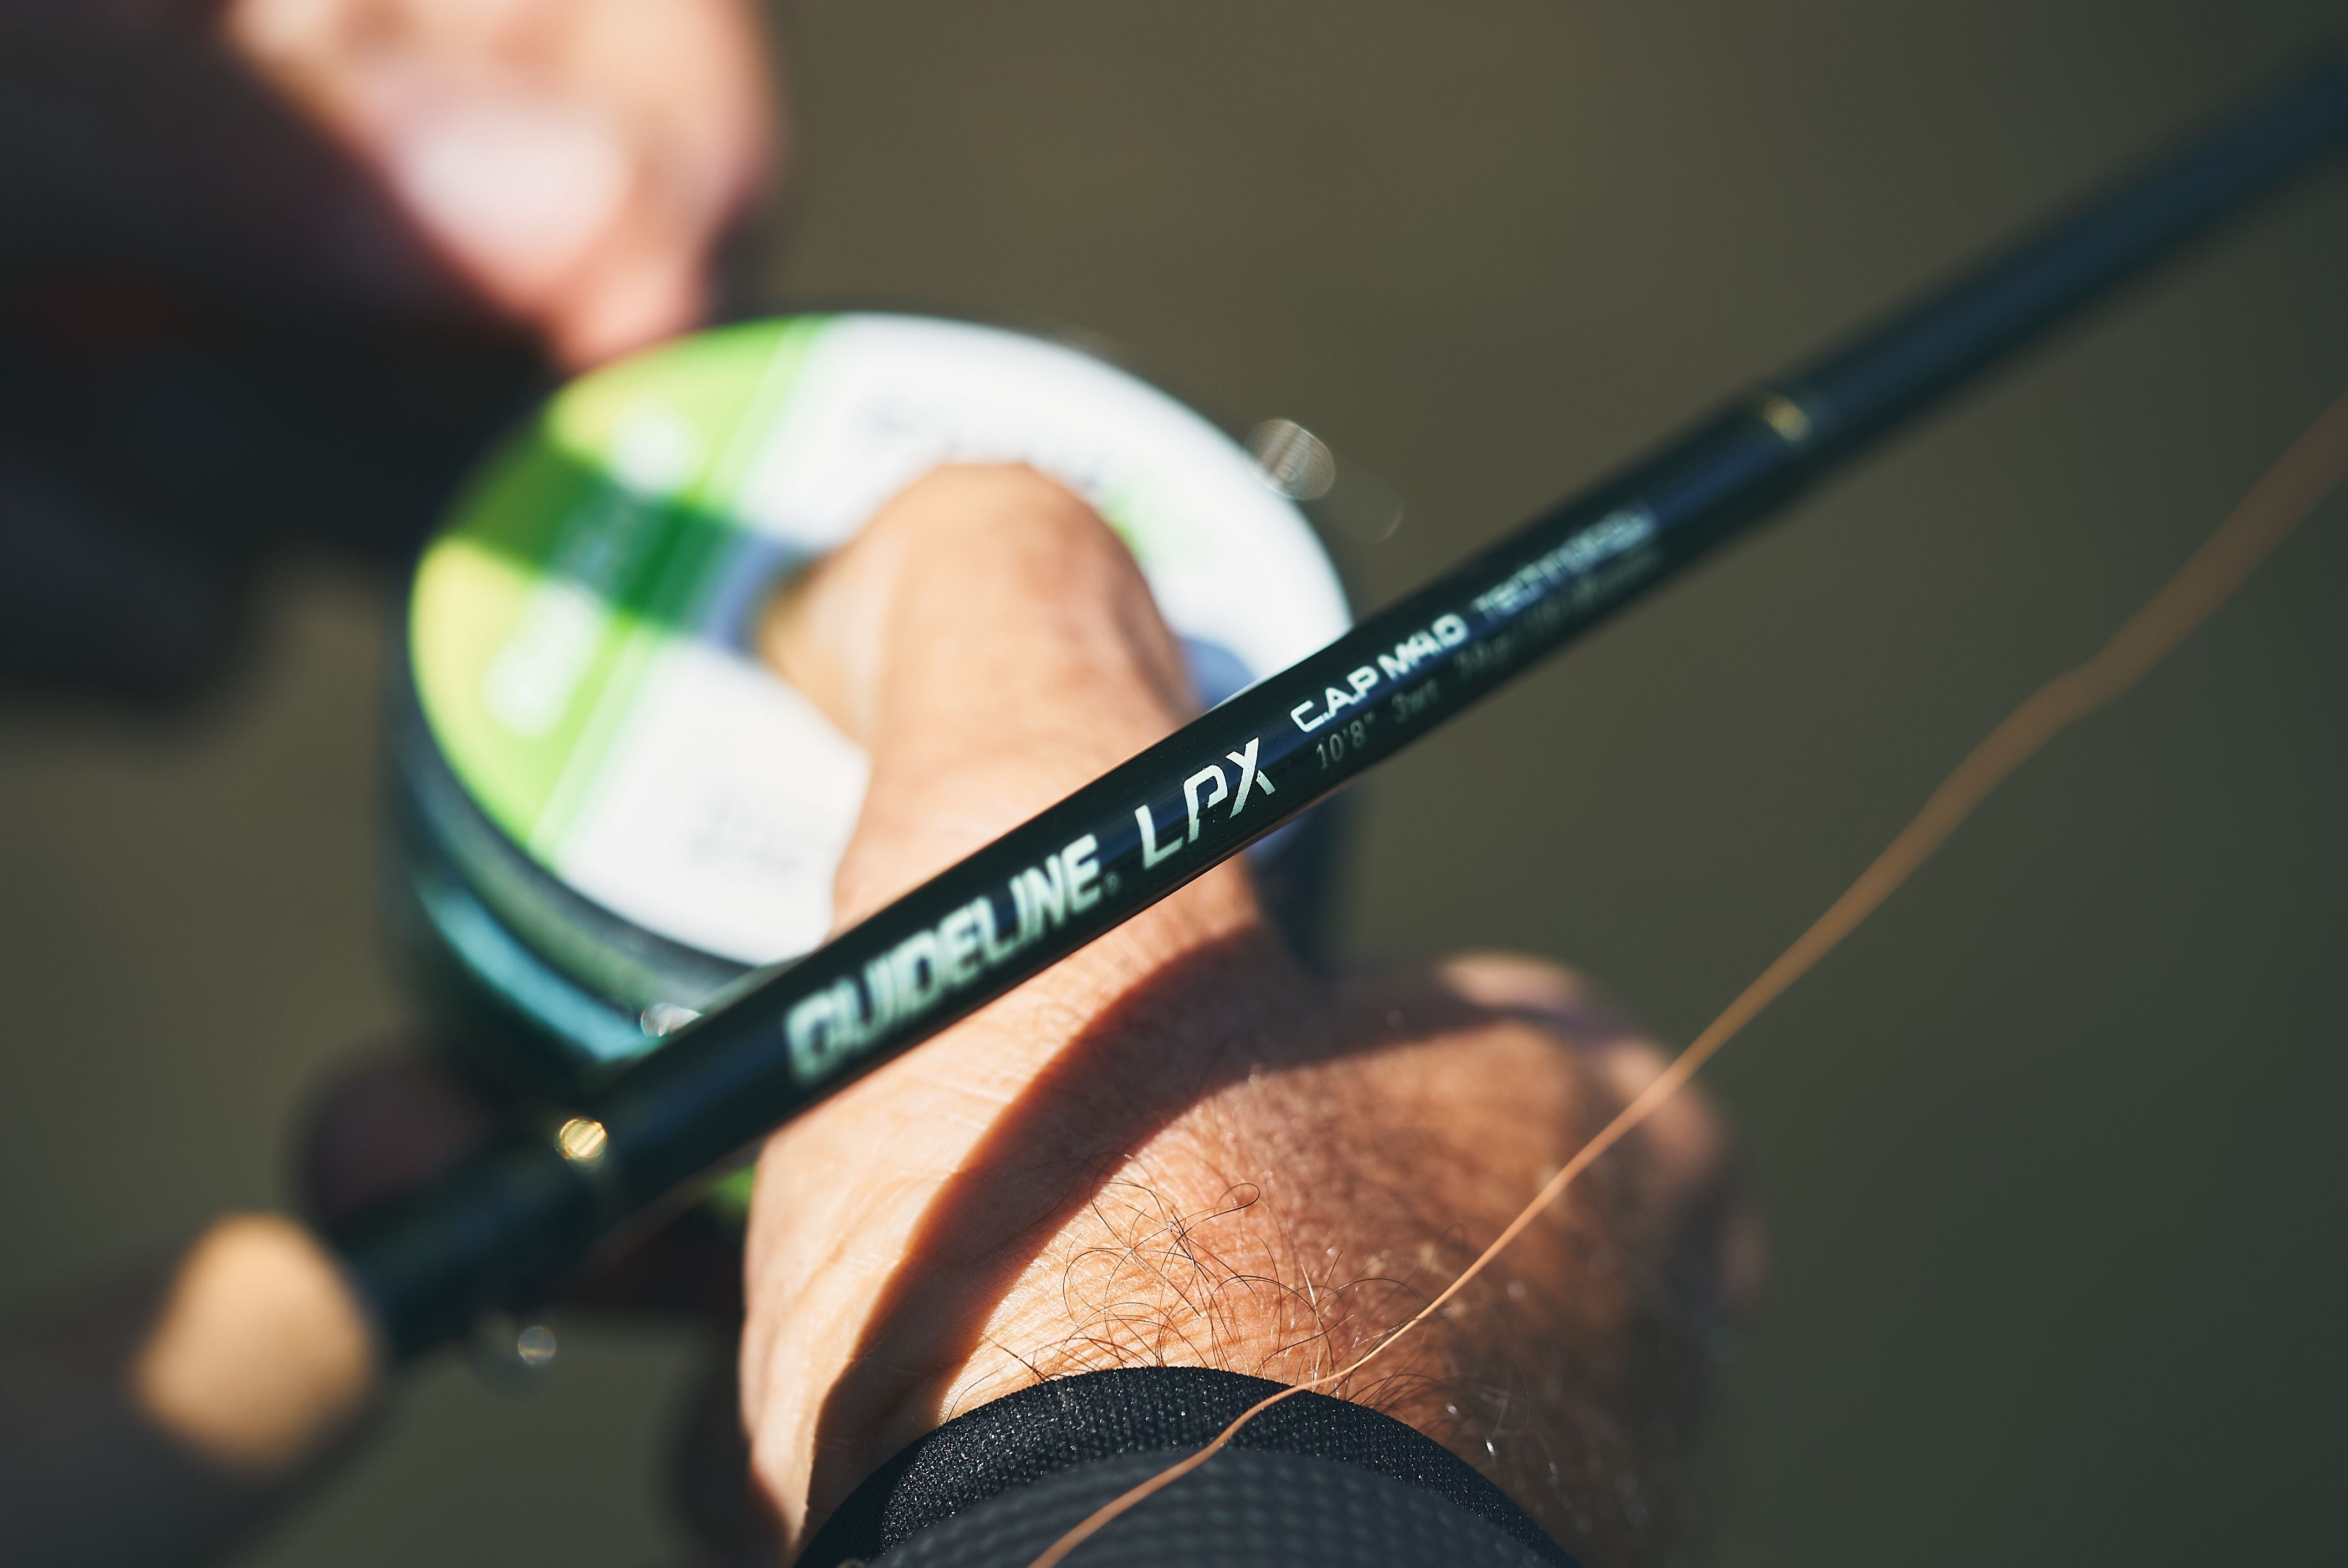 GUIDELINE LPX NYMPH 4 PCE FLY ROD